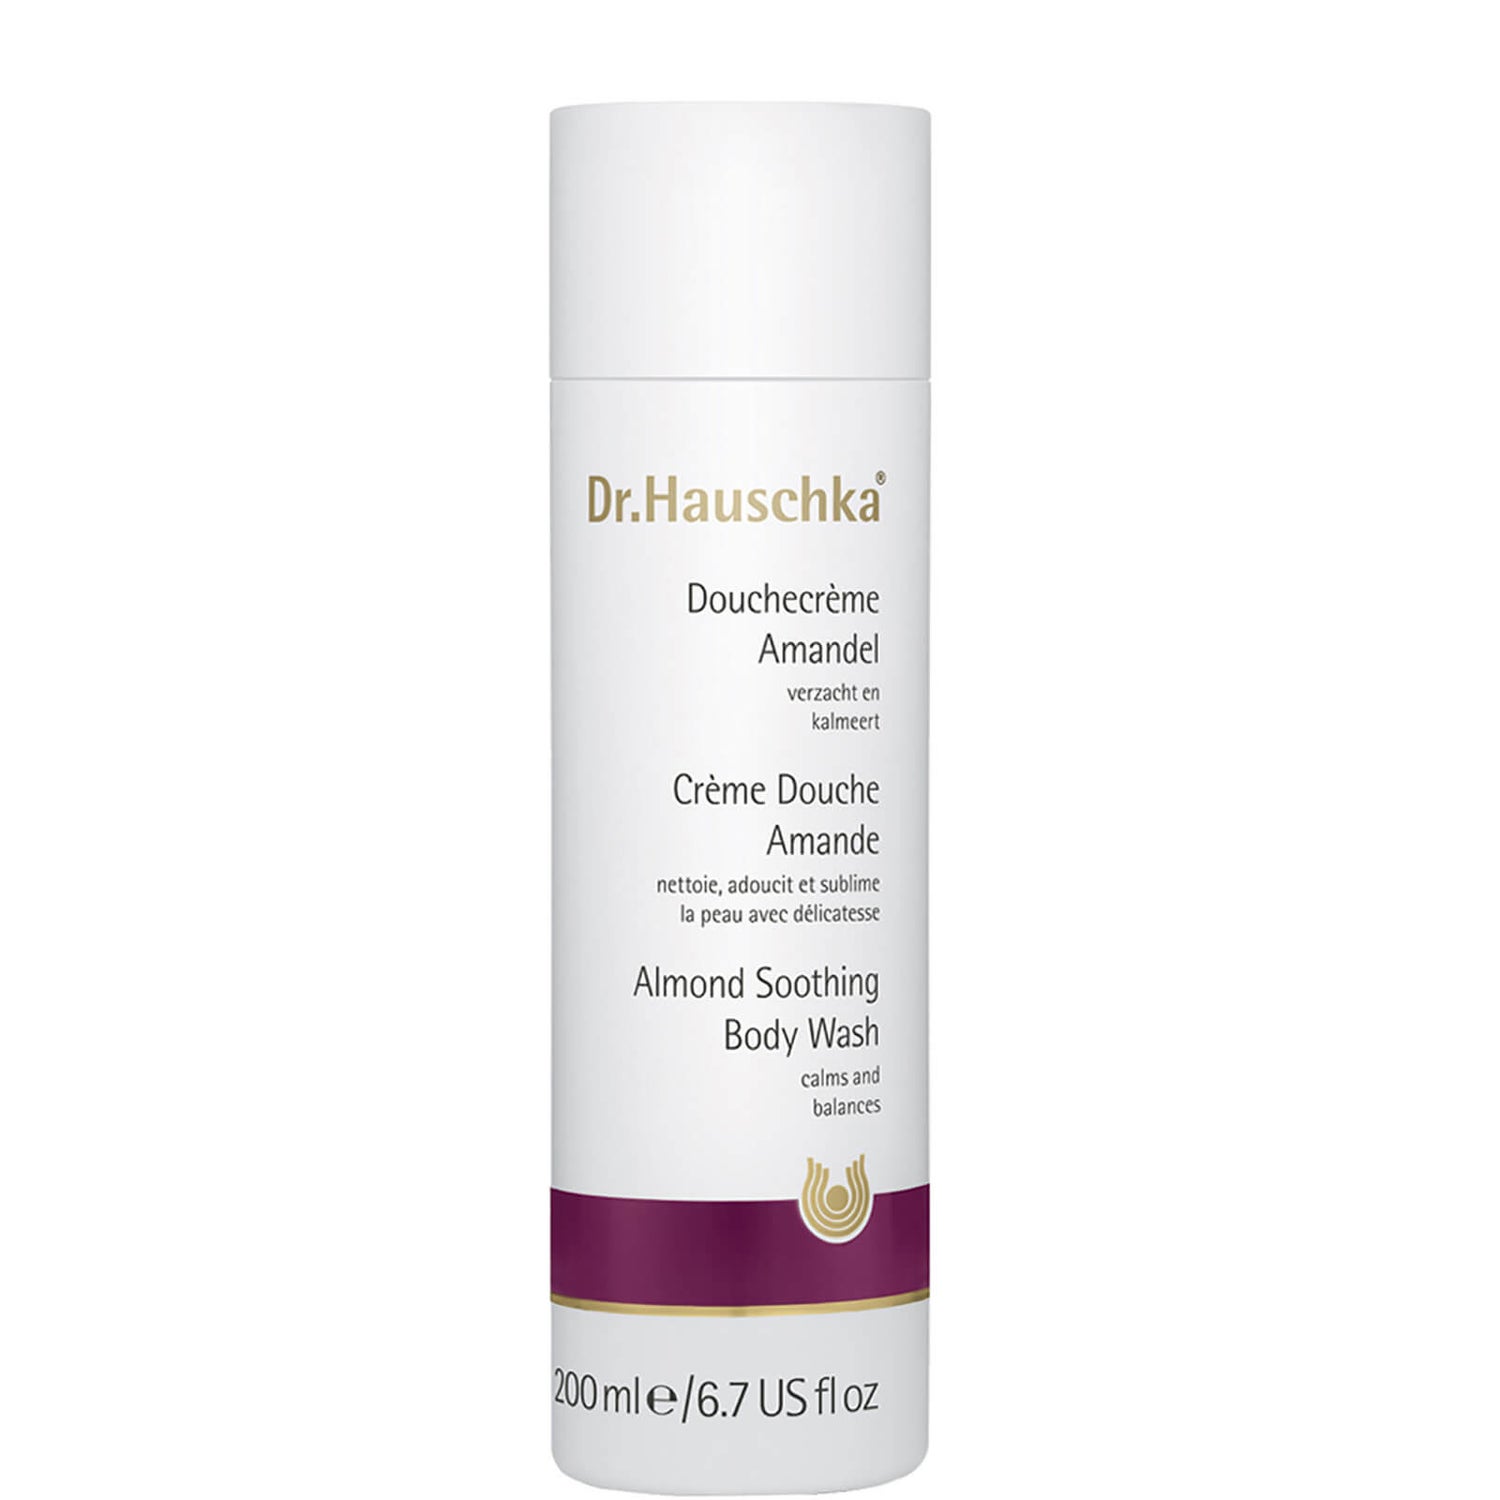 Dr.Hauschka Almond Soothing Body Wash